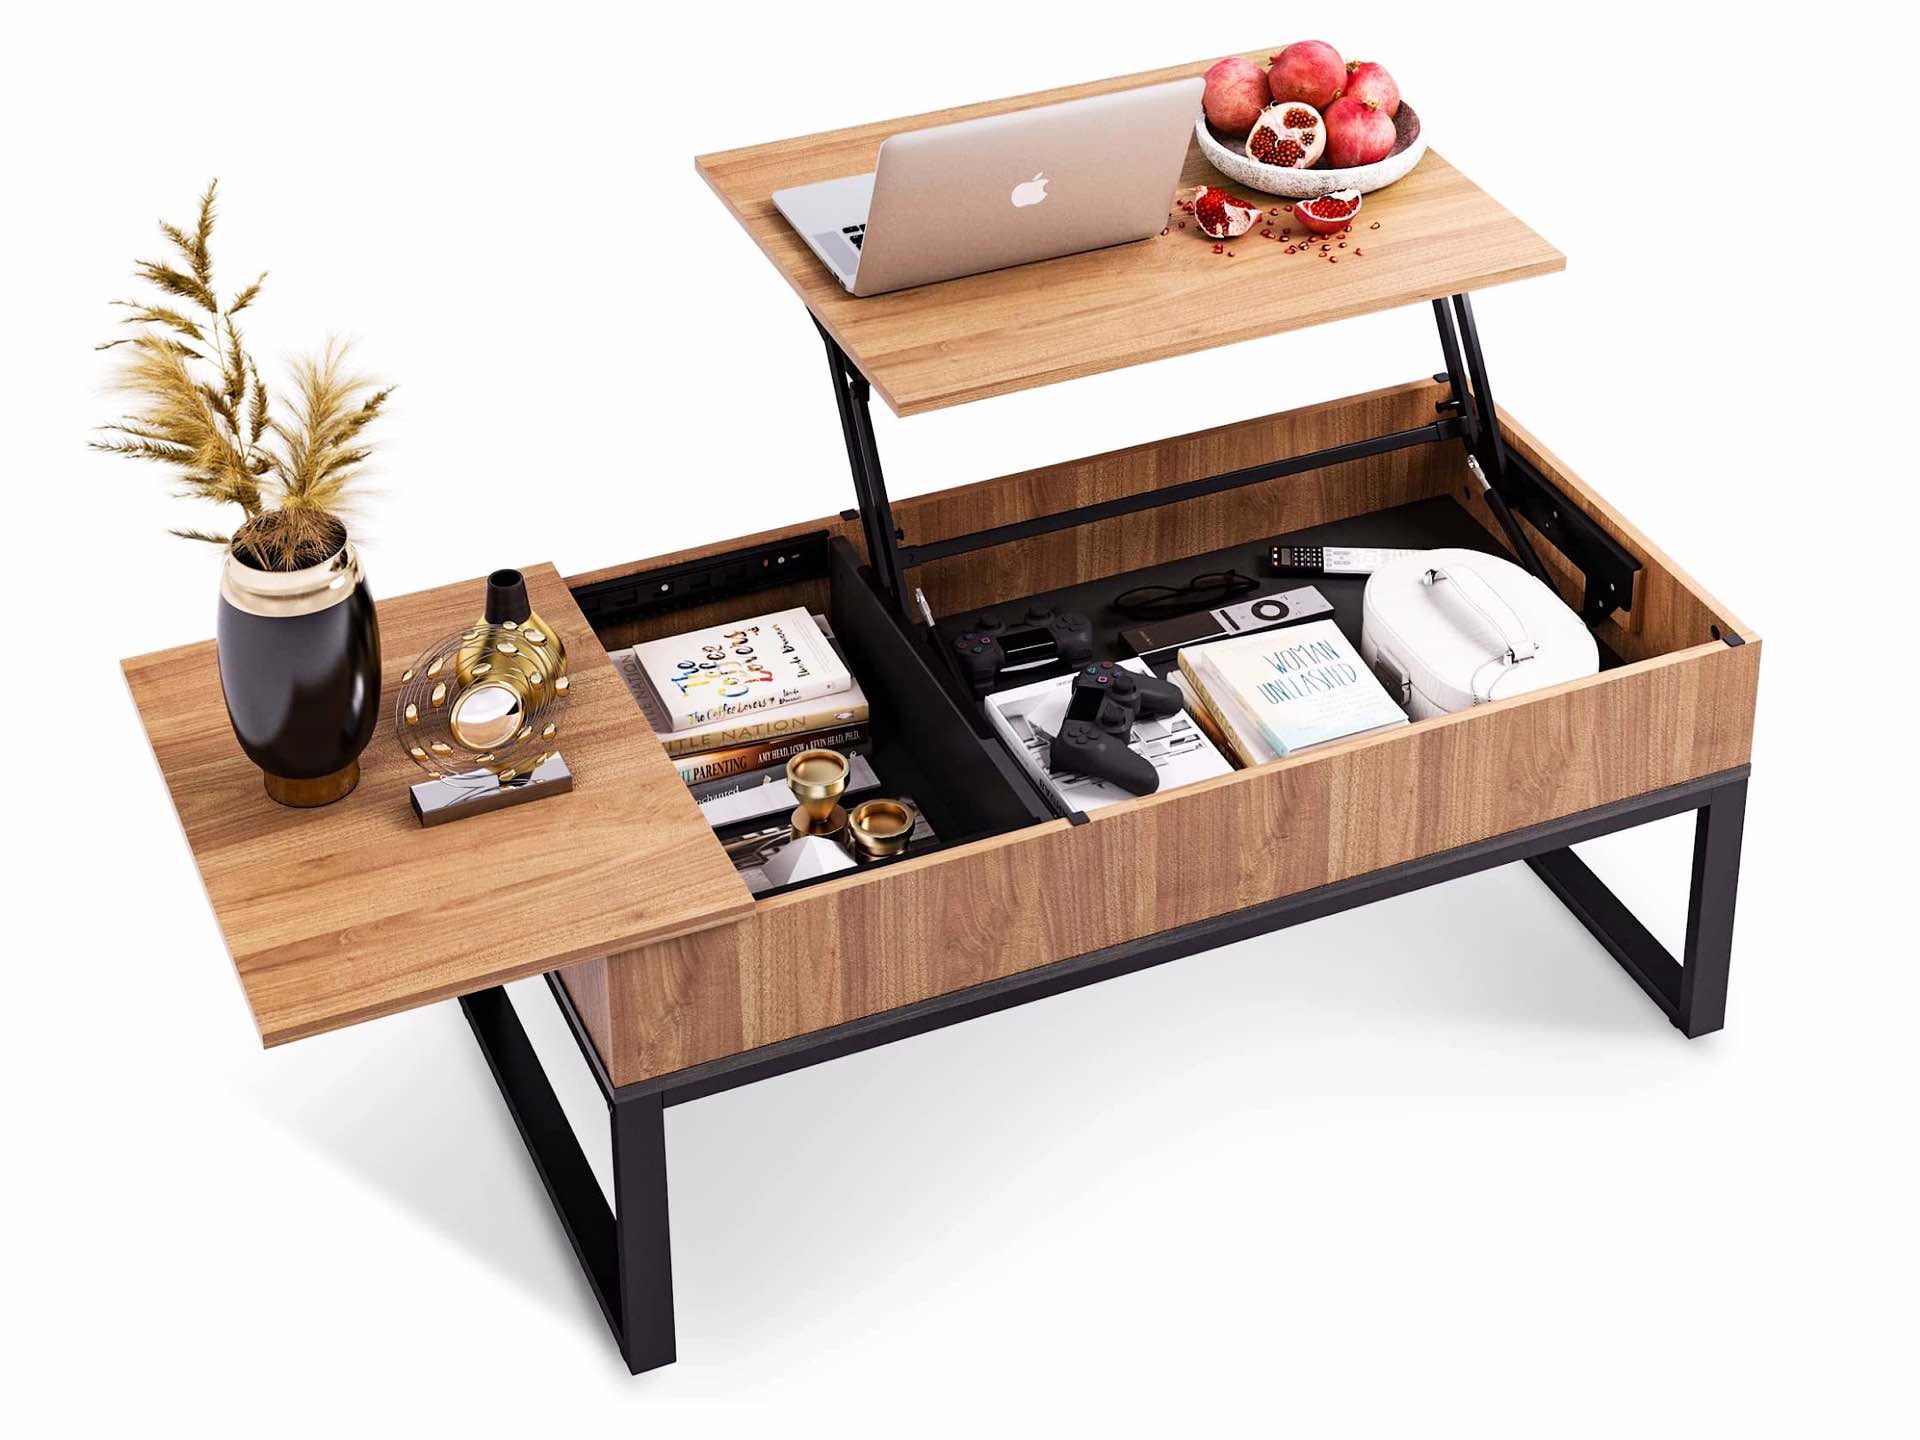 wlive-pop-up-coffee-table-with-hidden-storage-compartments